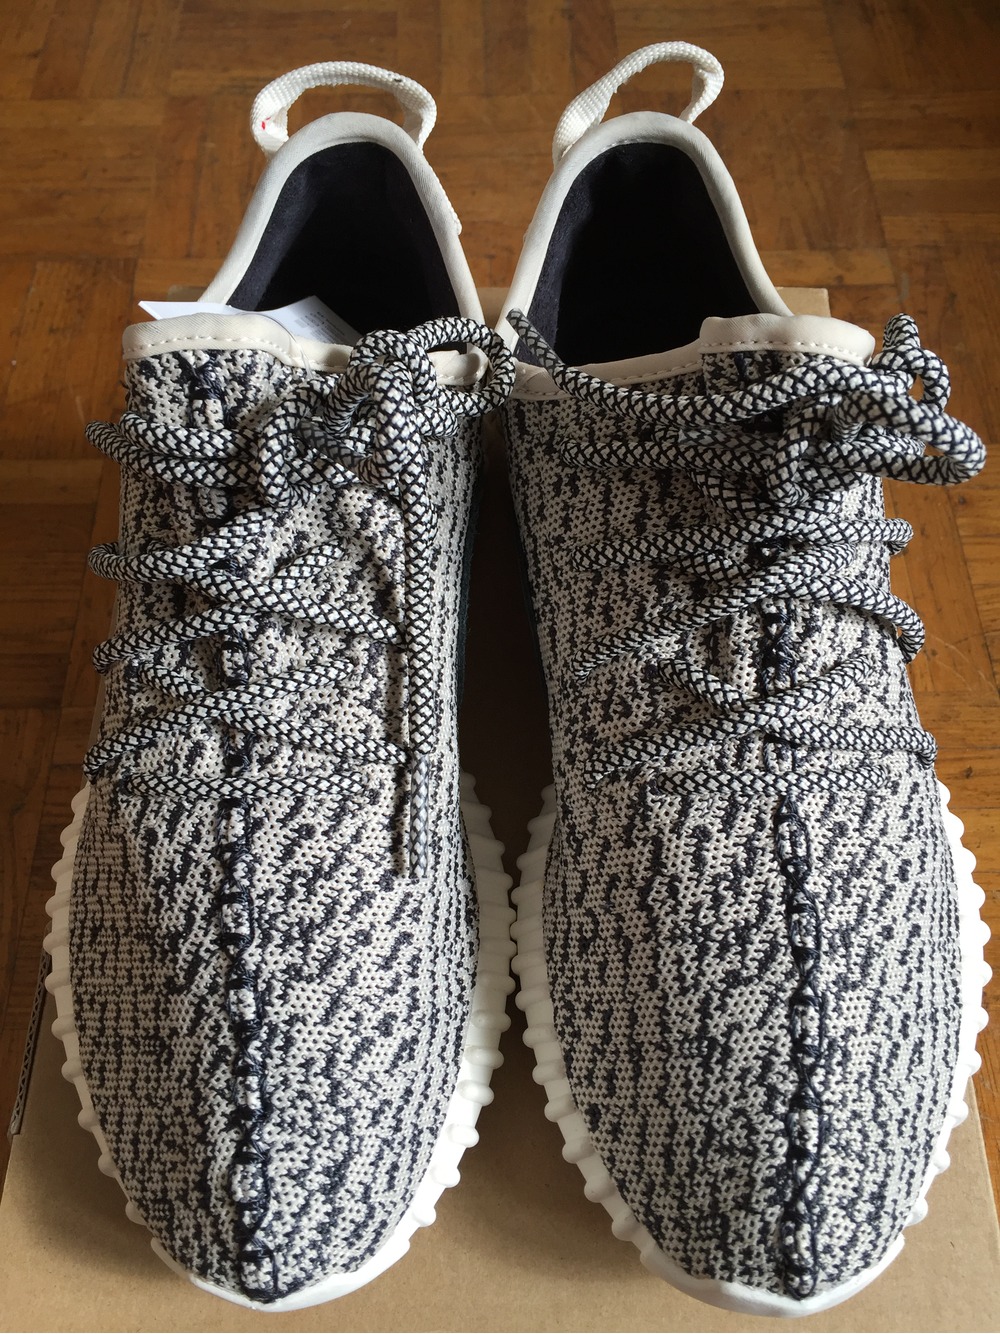 Yeezy Sesame Size 9 Kijiji Buy, Sell & Save with Canada's